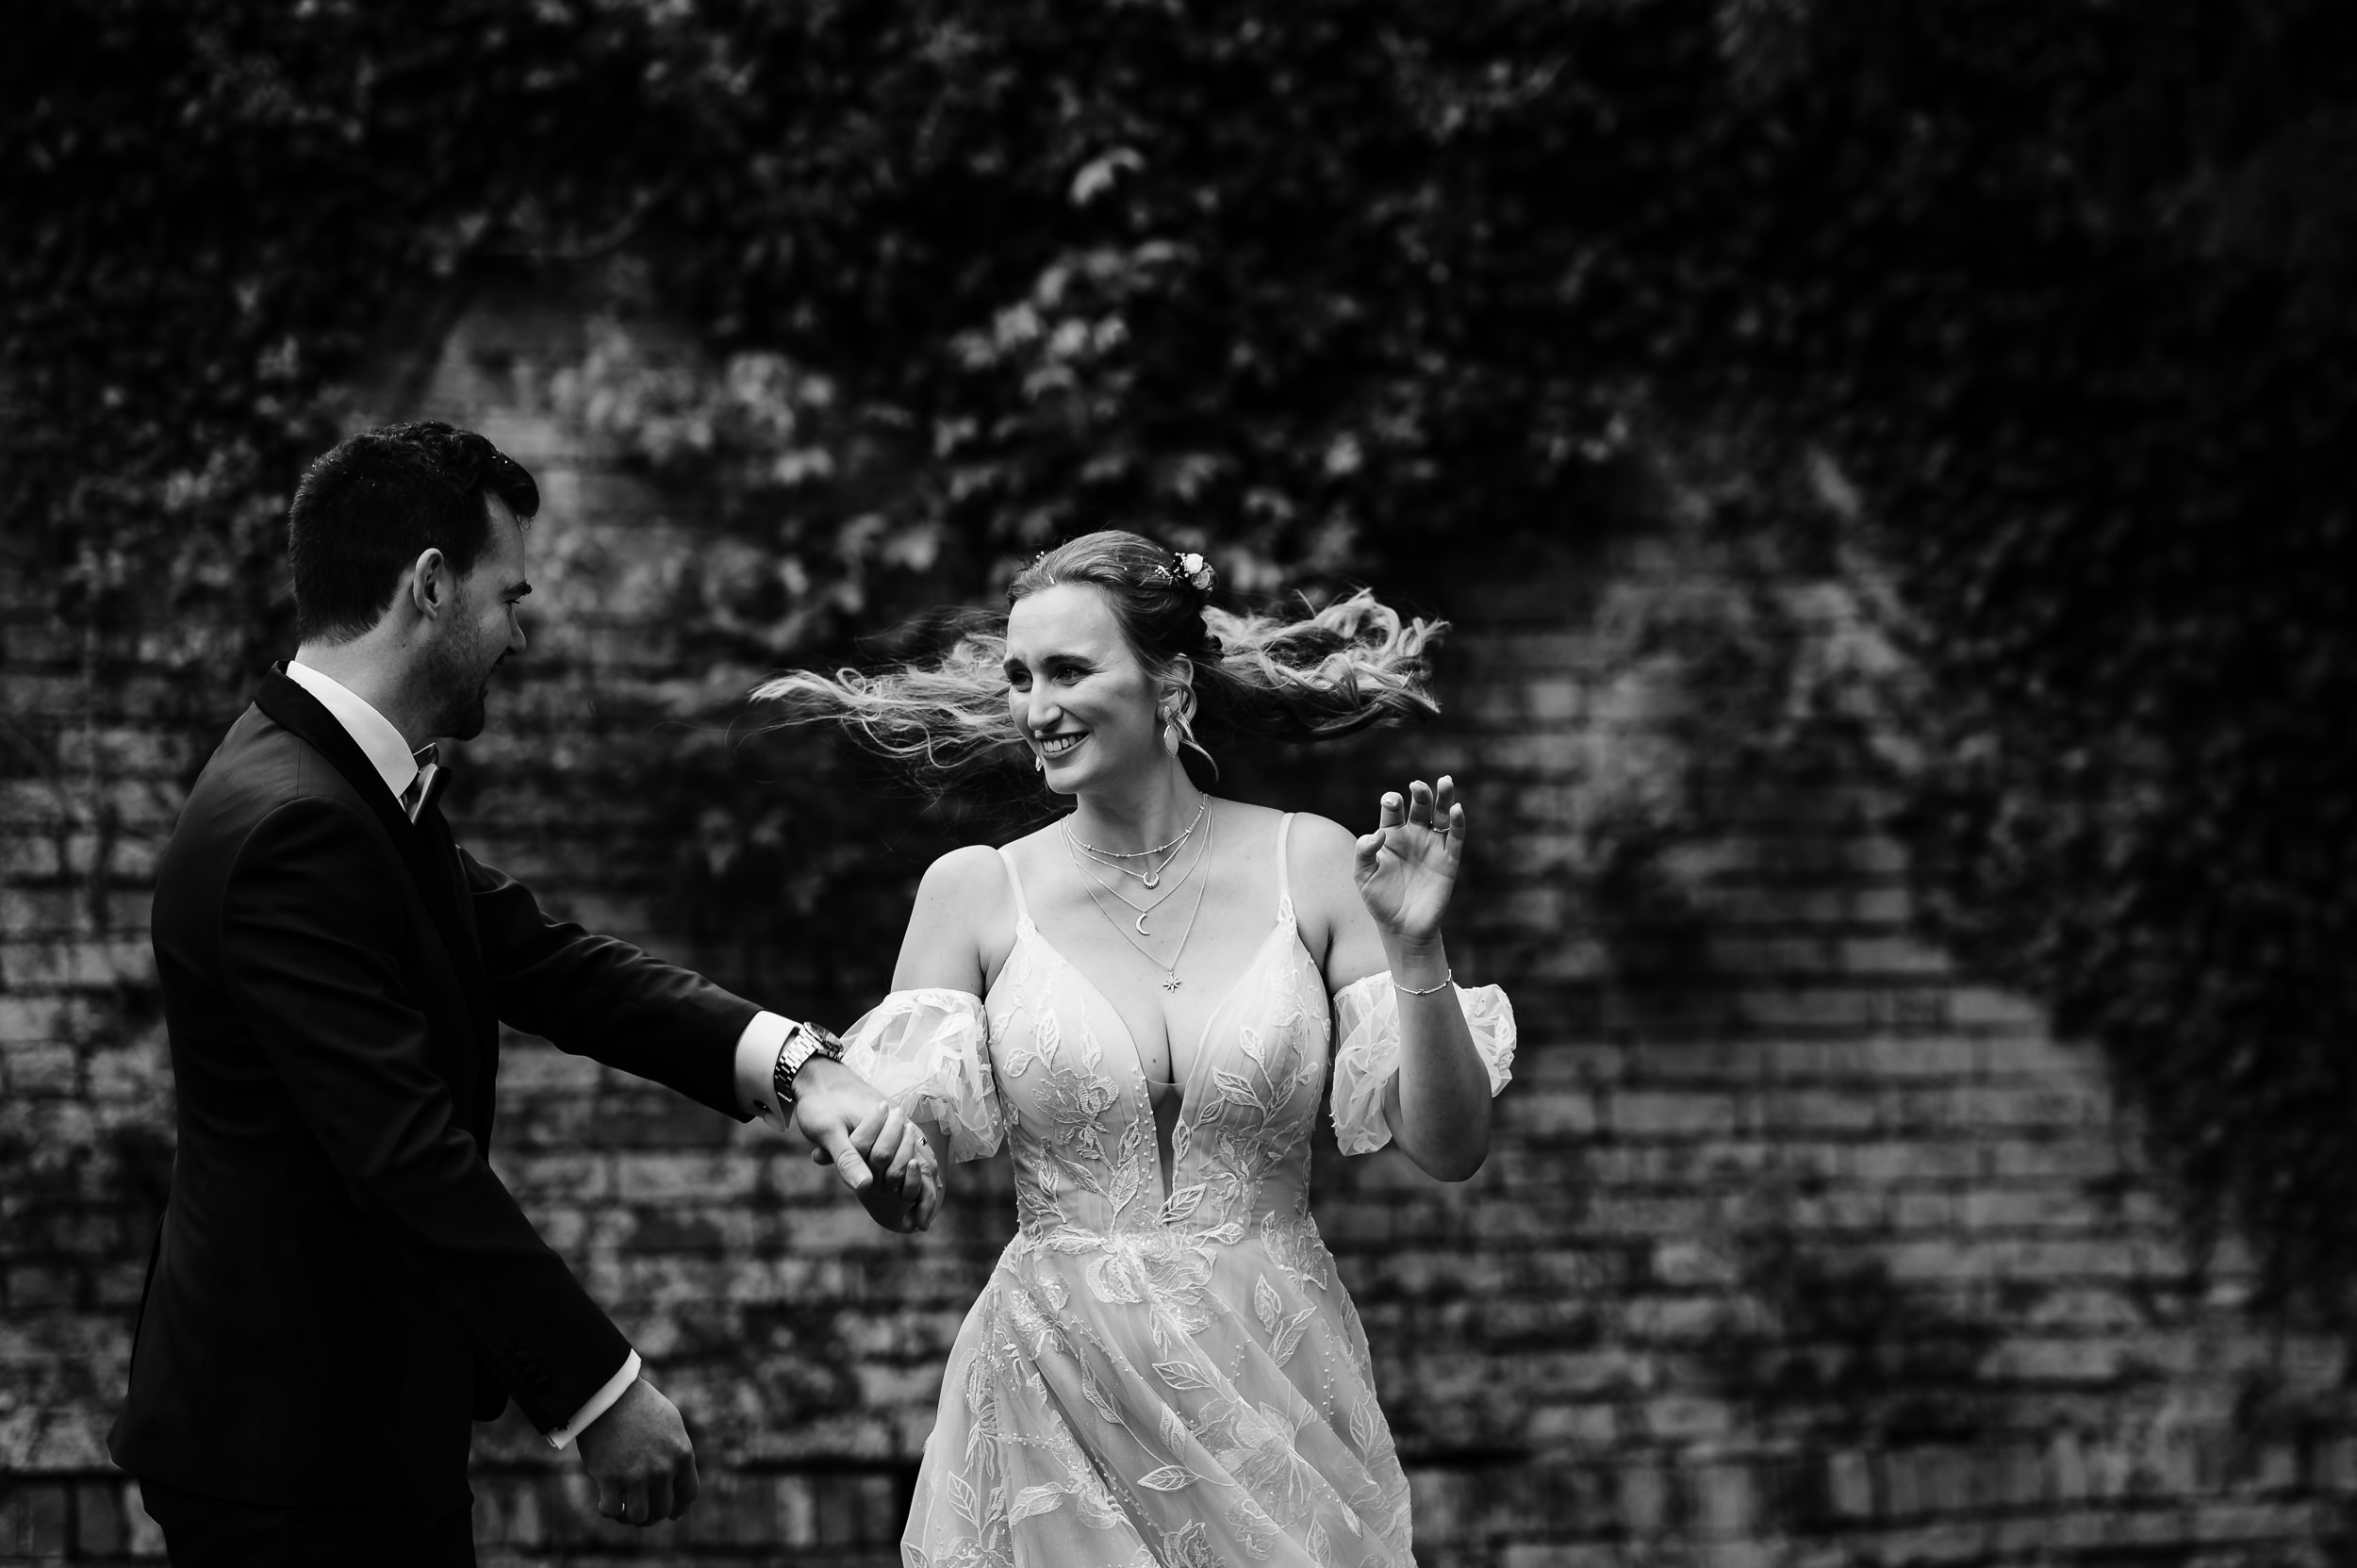 Bride and groom dancing in the gardens at dodmoor house